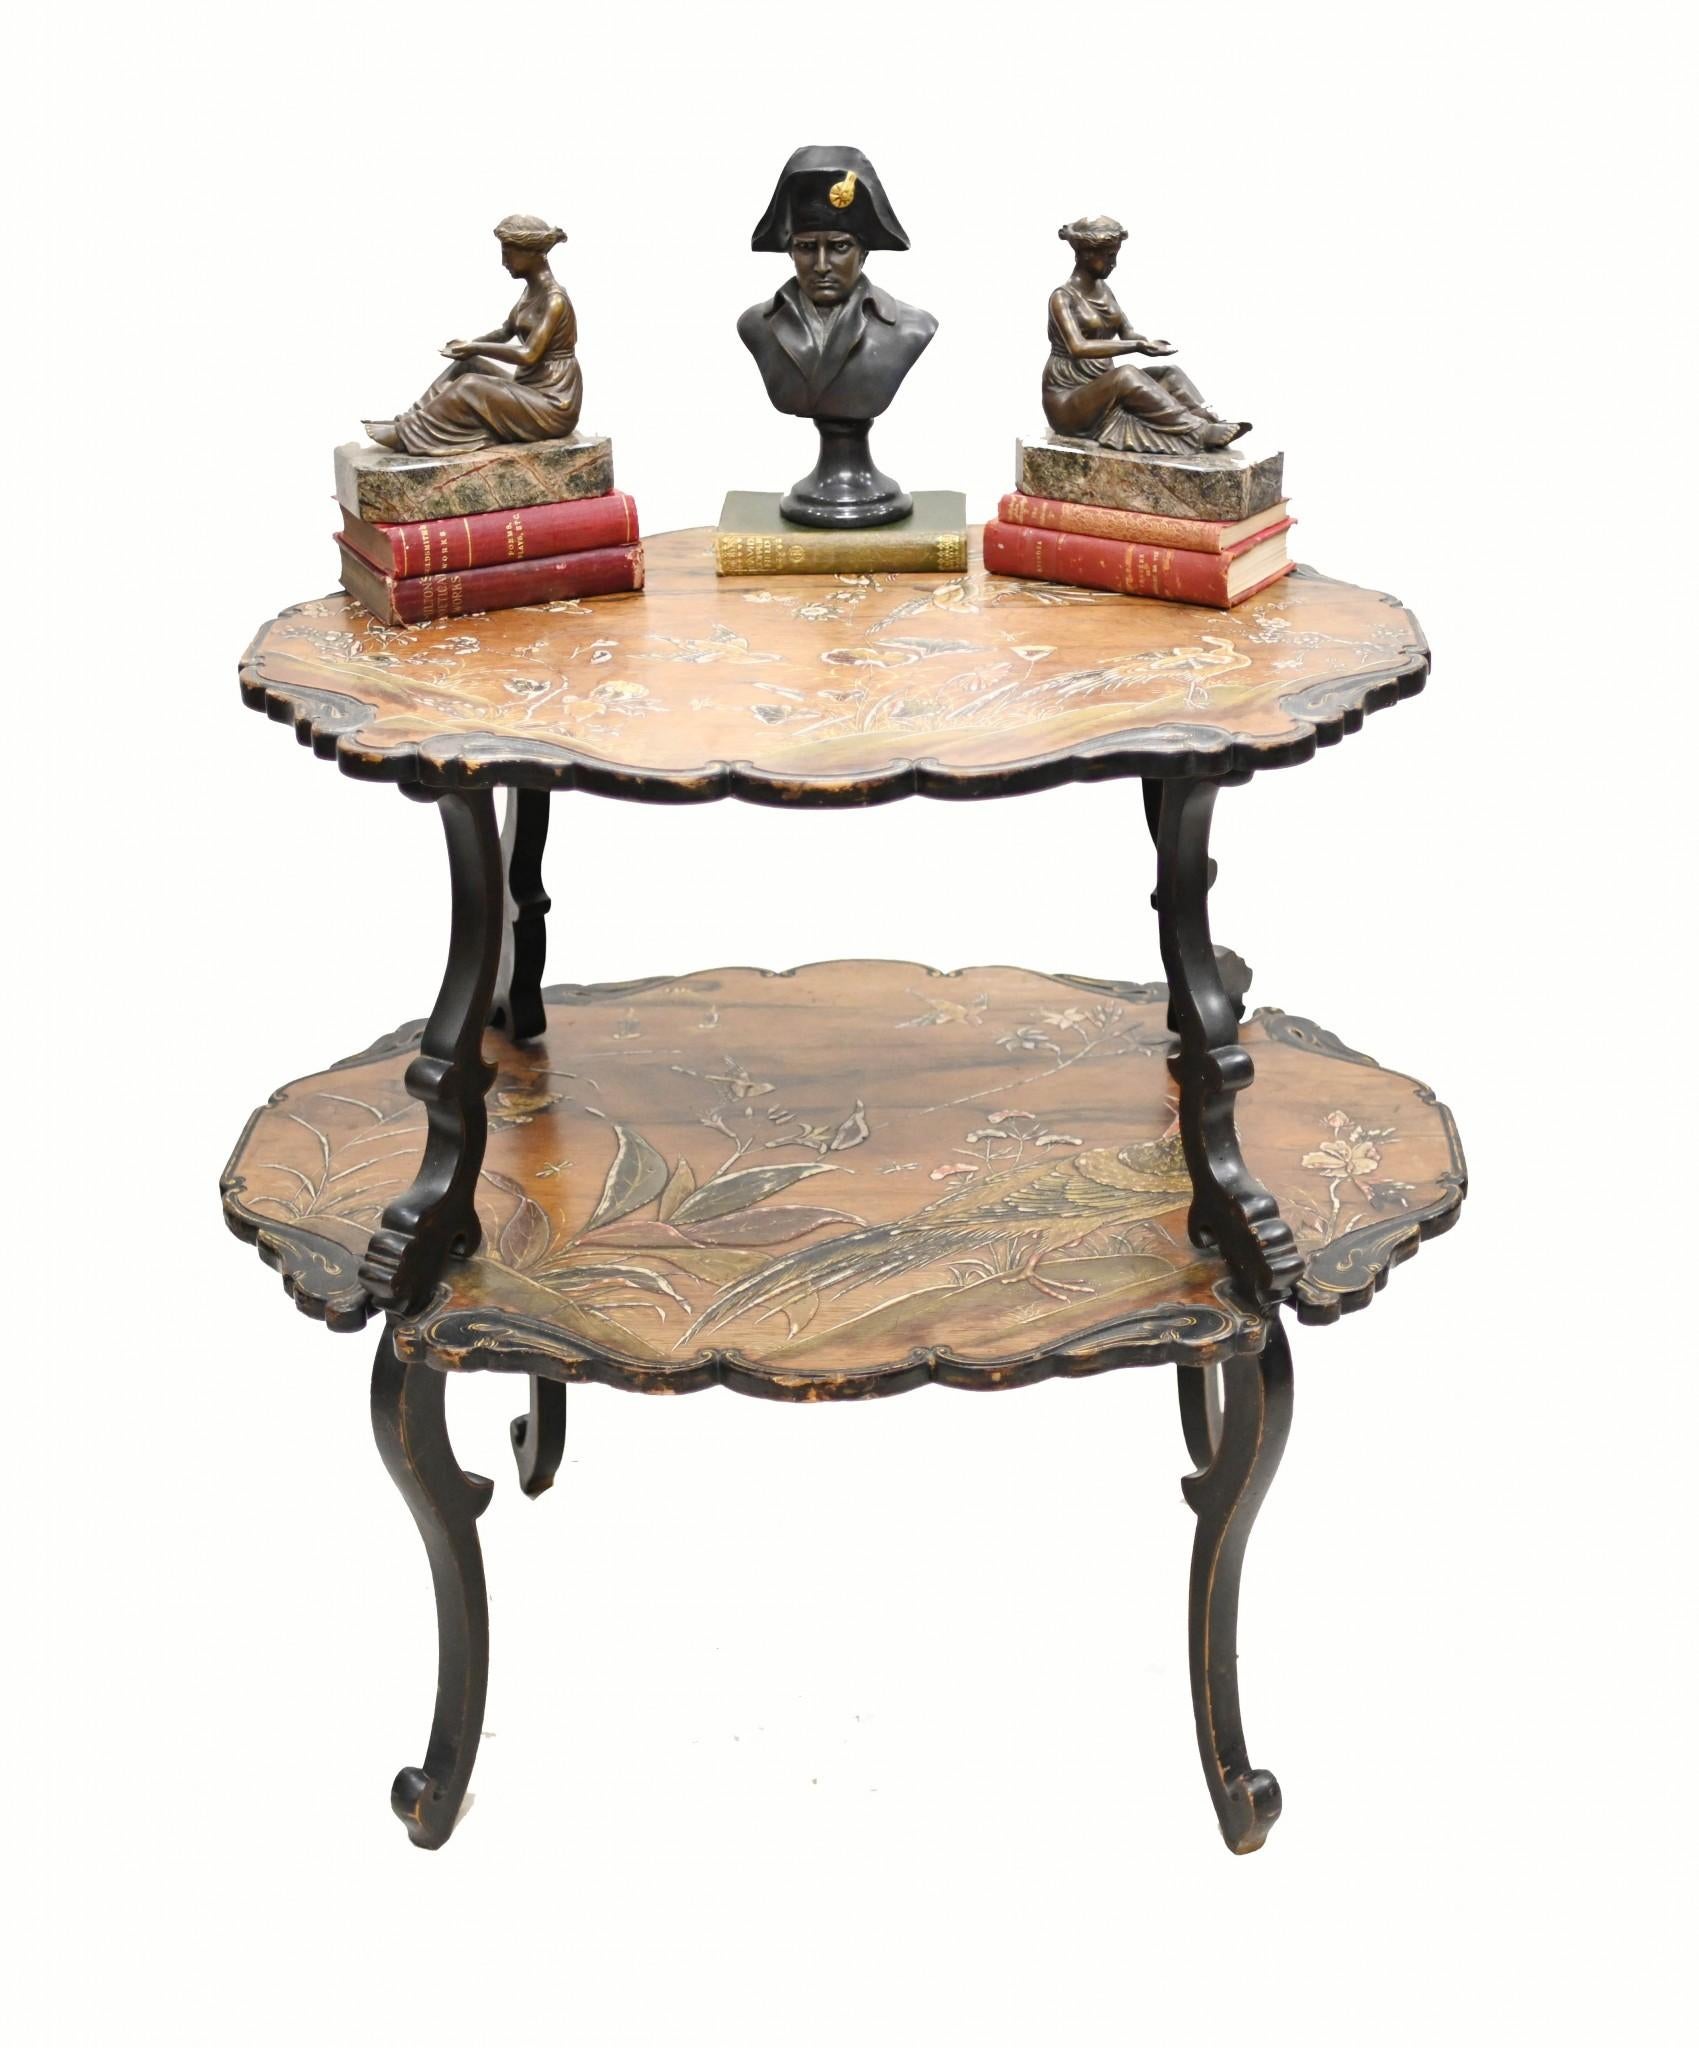 Gorgeous French two tiered etagere table with elegant Japanning
Designs include floral motifs and Japanese birds to great affect
The Japanning is very detailed and intricate and is raised - relief - in places
We date this piece to circa 1890 and it